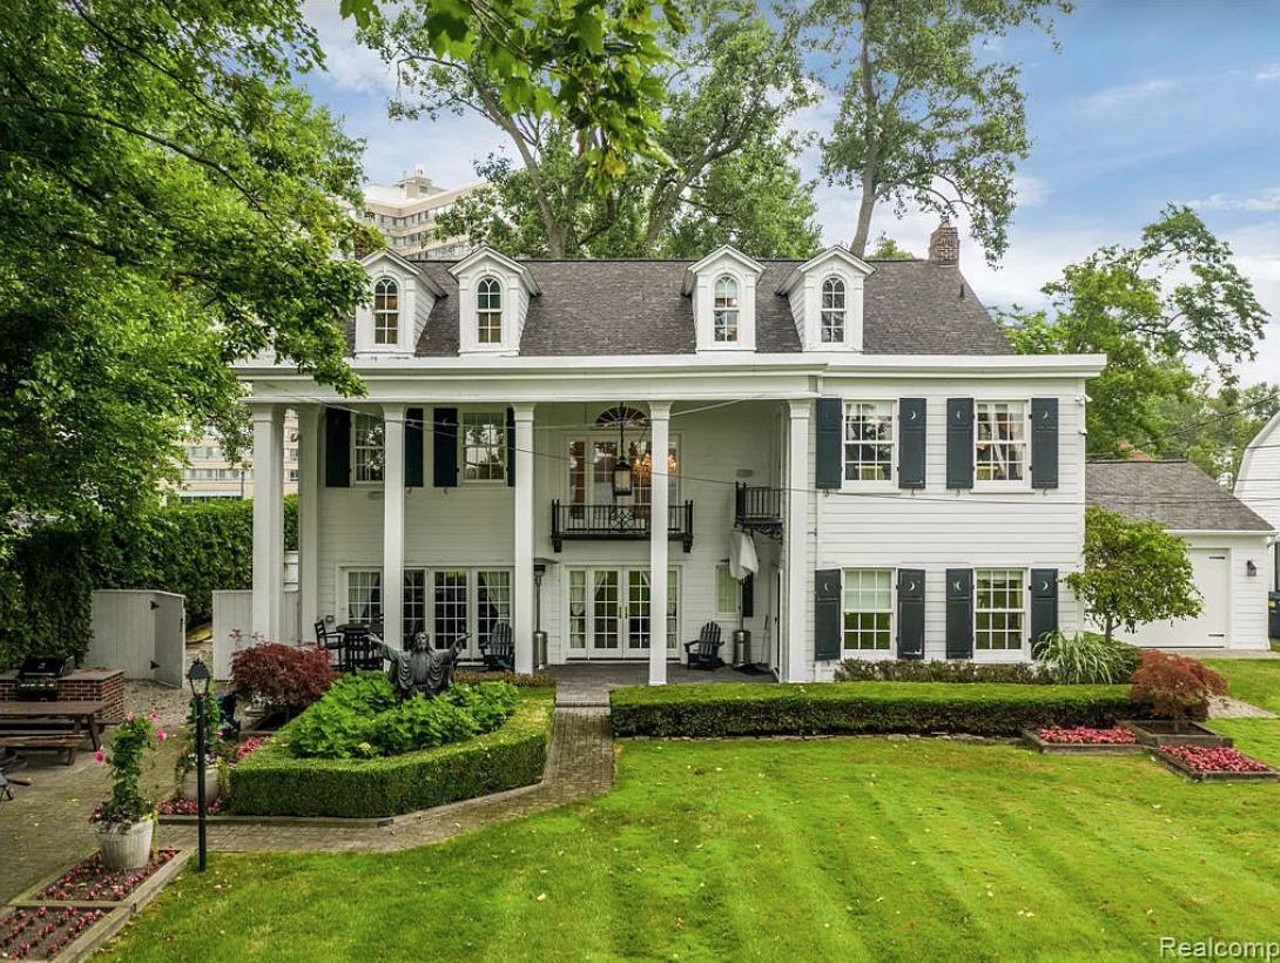 Kid Rock's Detroit home is back on the market for $2.2M &#151; let's take a tour